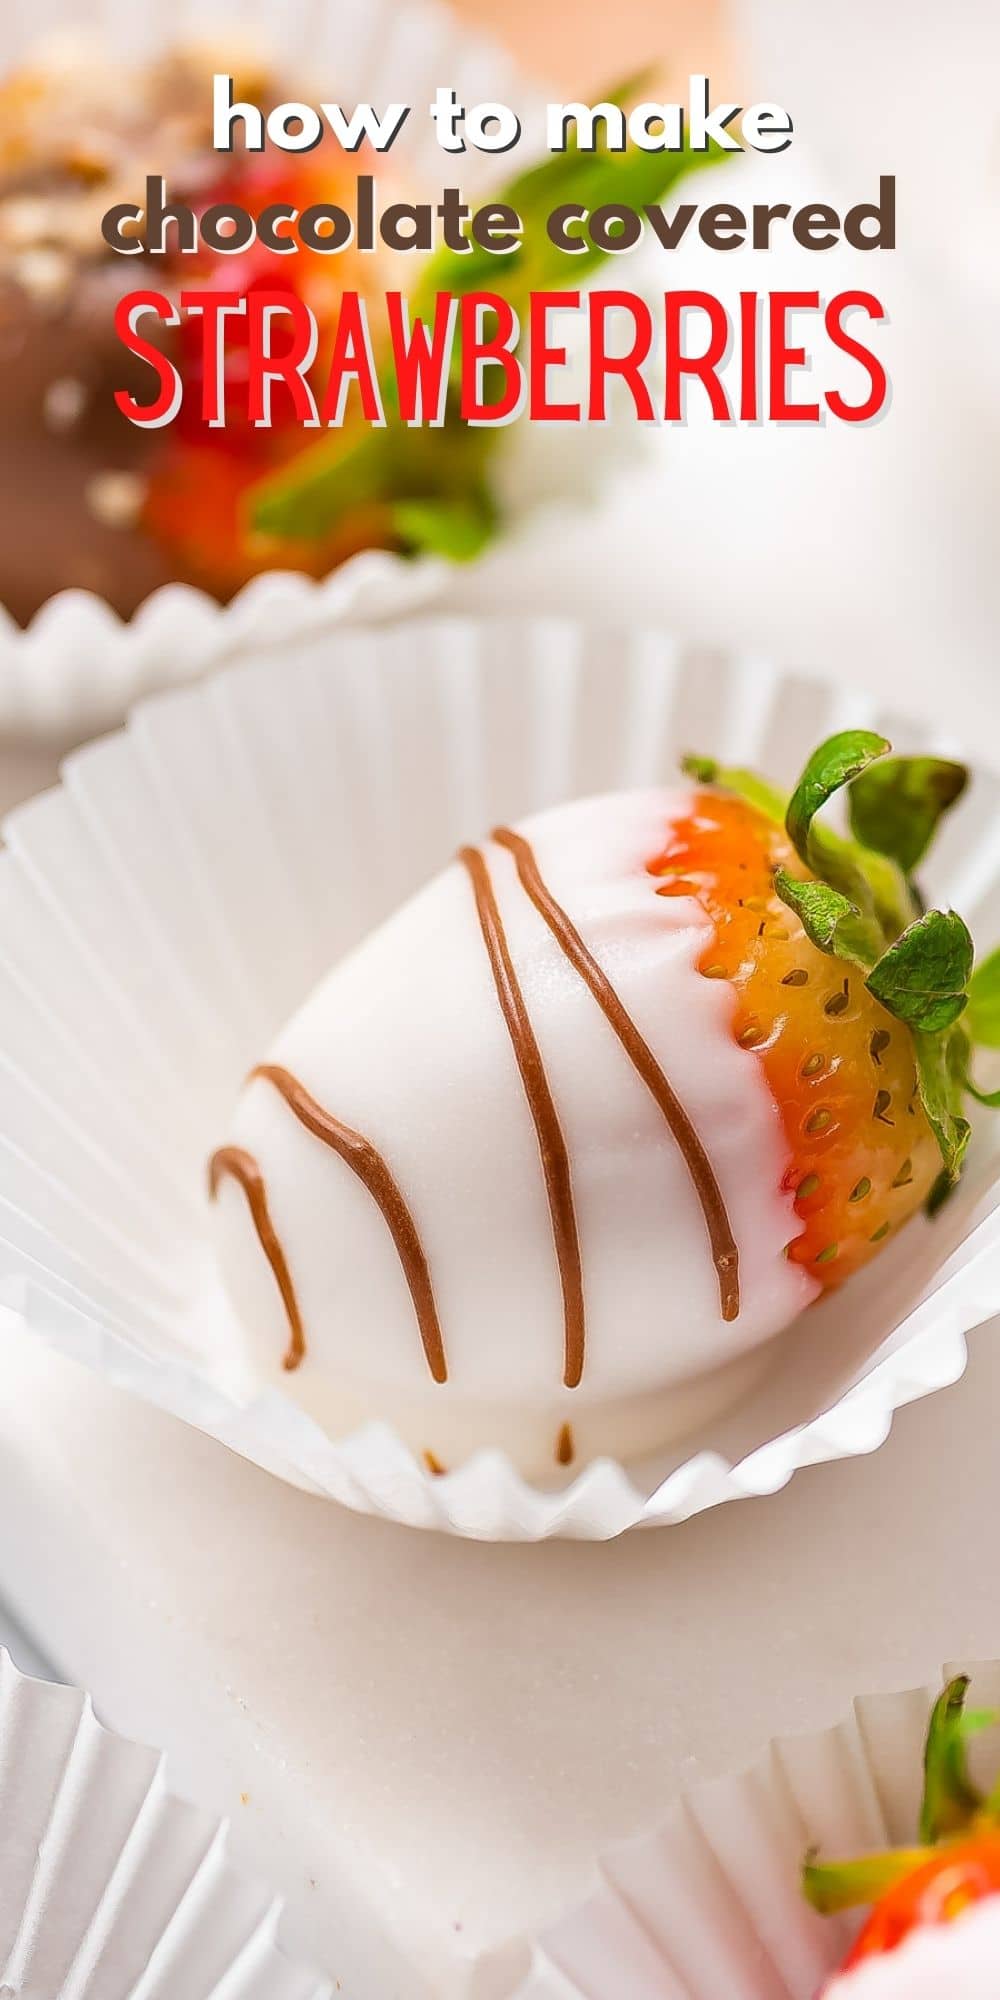 Close up shot of white chocolate covered strawberry with milk chocolate drizzle and recipe title on top of image